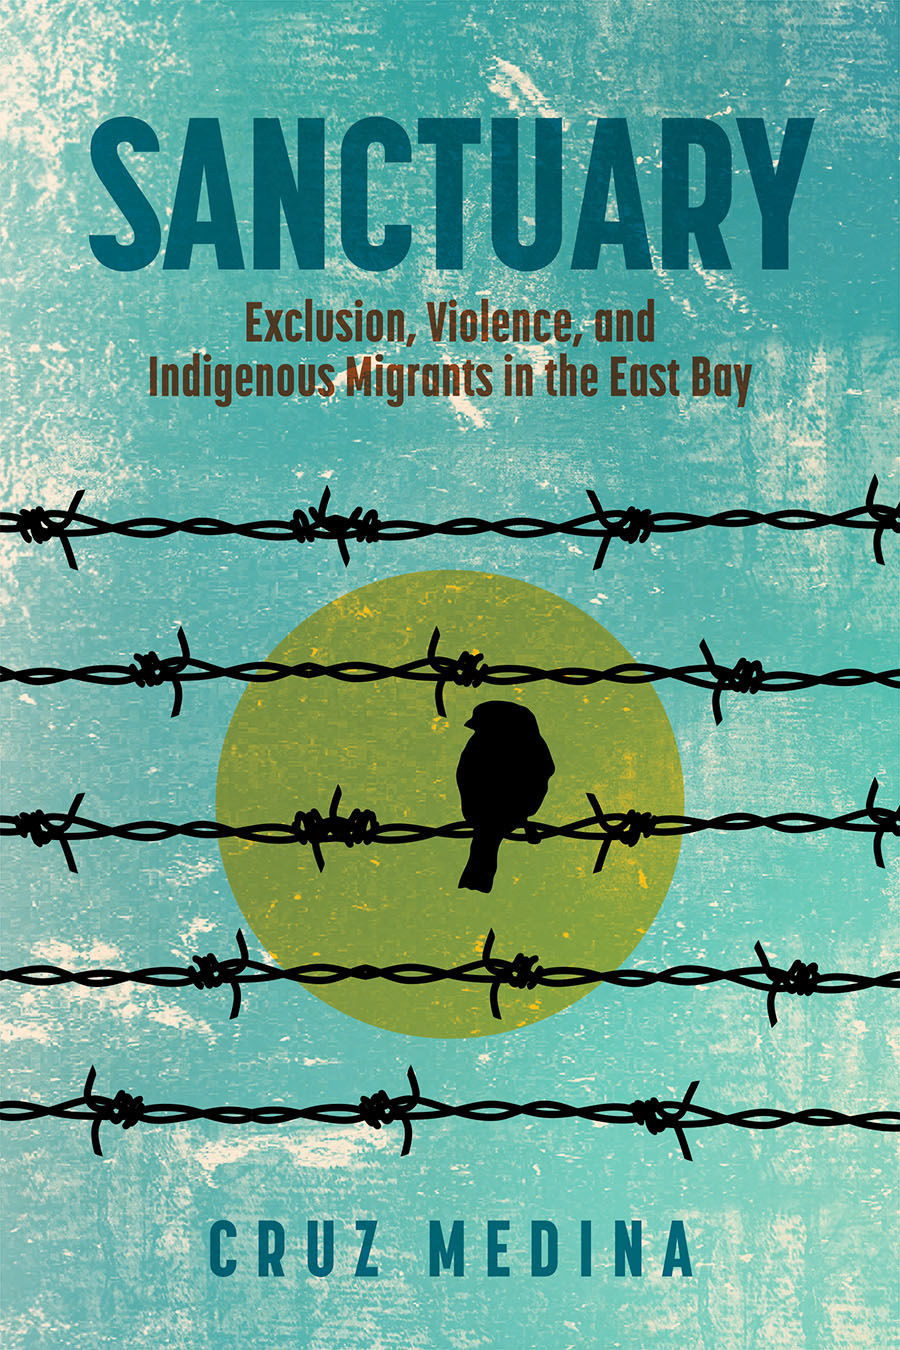 Front cover of Sanctuary: Exclusion, Violence, and Indigenous Migrants in the East Bay by Cruz Medina, featuring an outline of a black bird sitting on barbed wire fencing in front of a yellow sun.